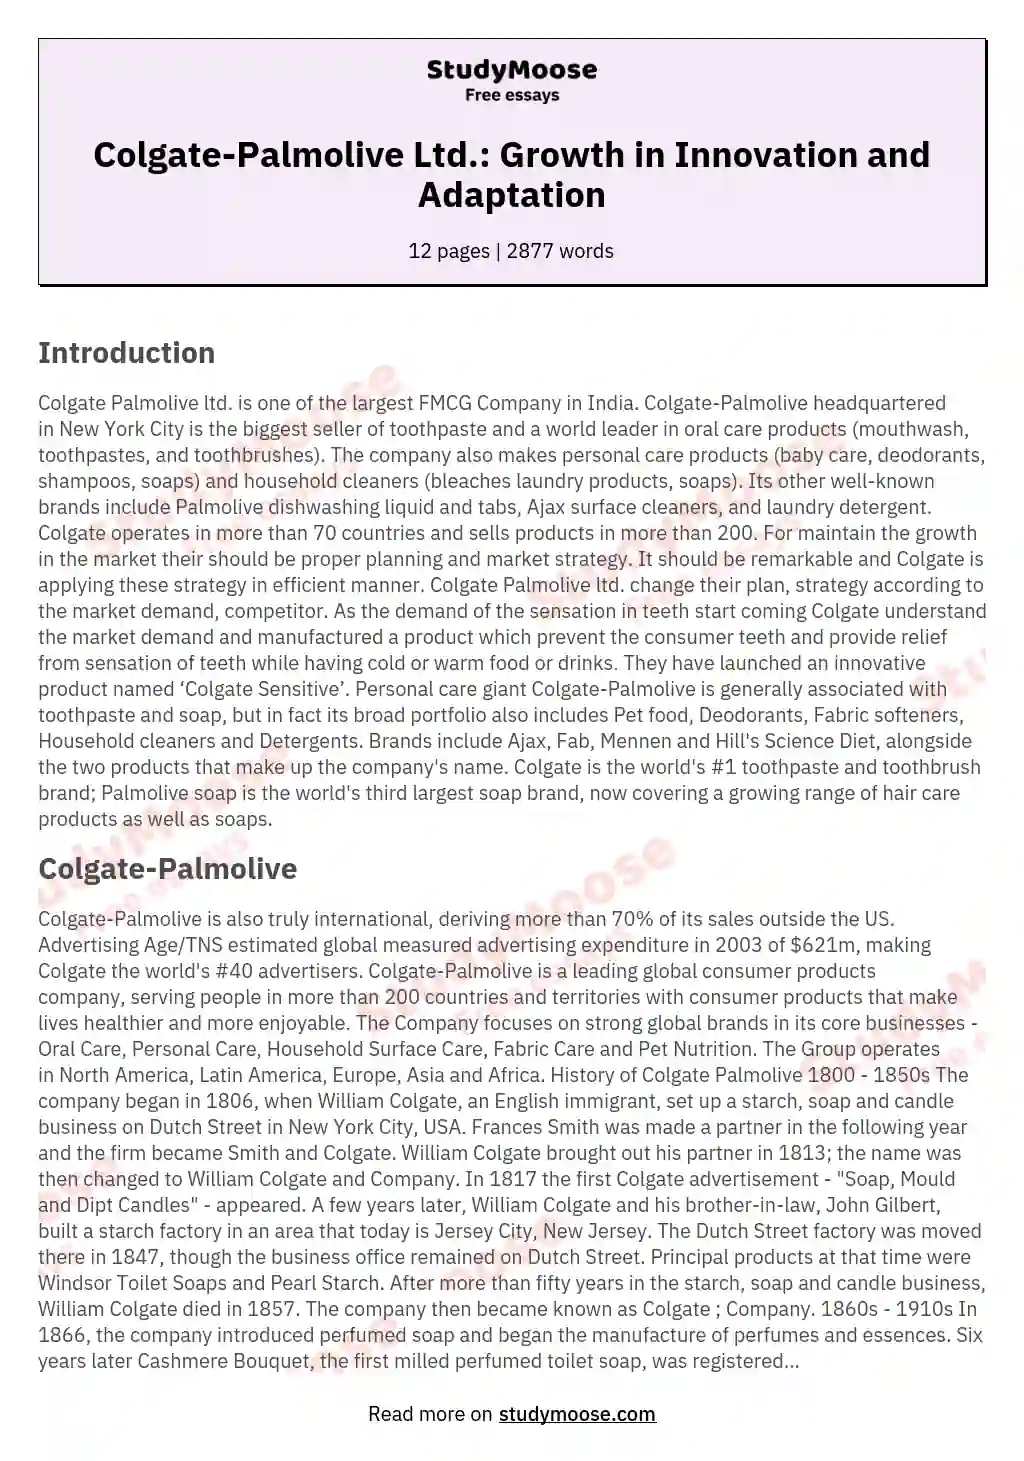 Colgate-Palmolive Ltd.: Growth in Innovation and Adaptation essay